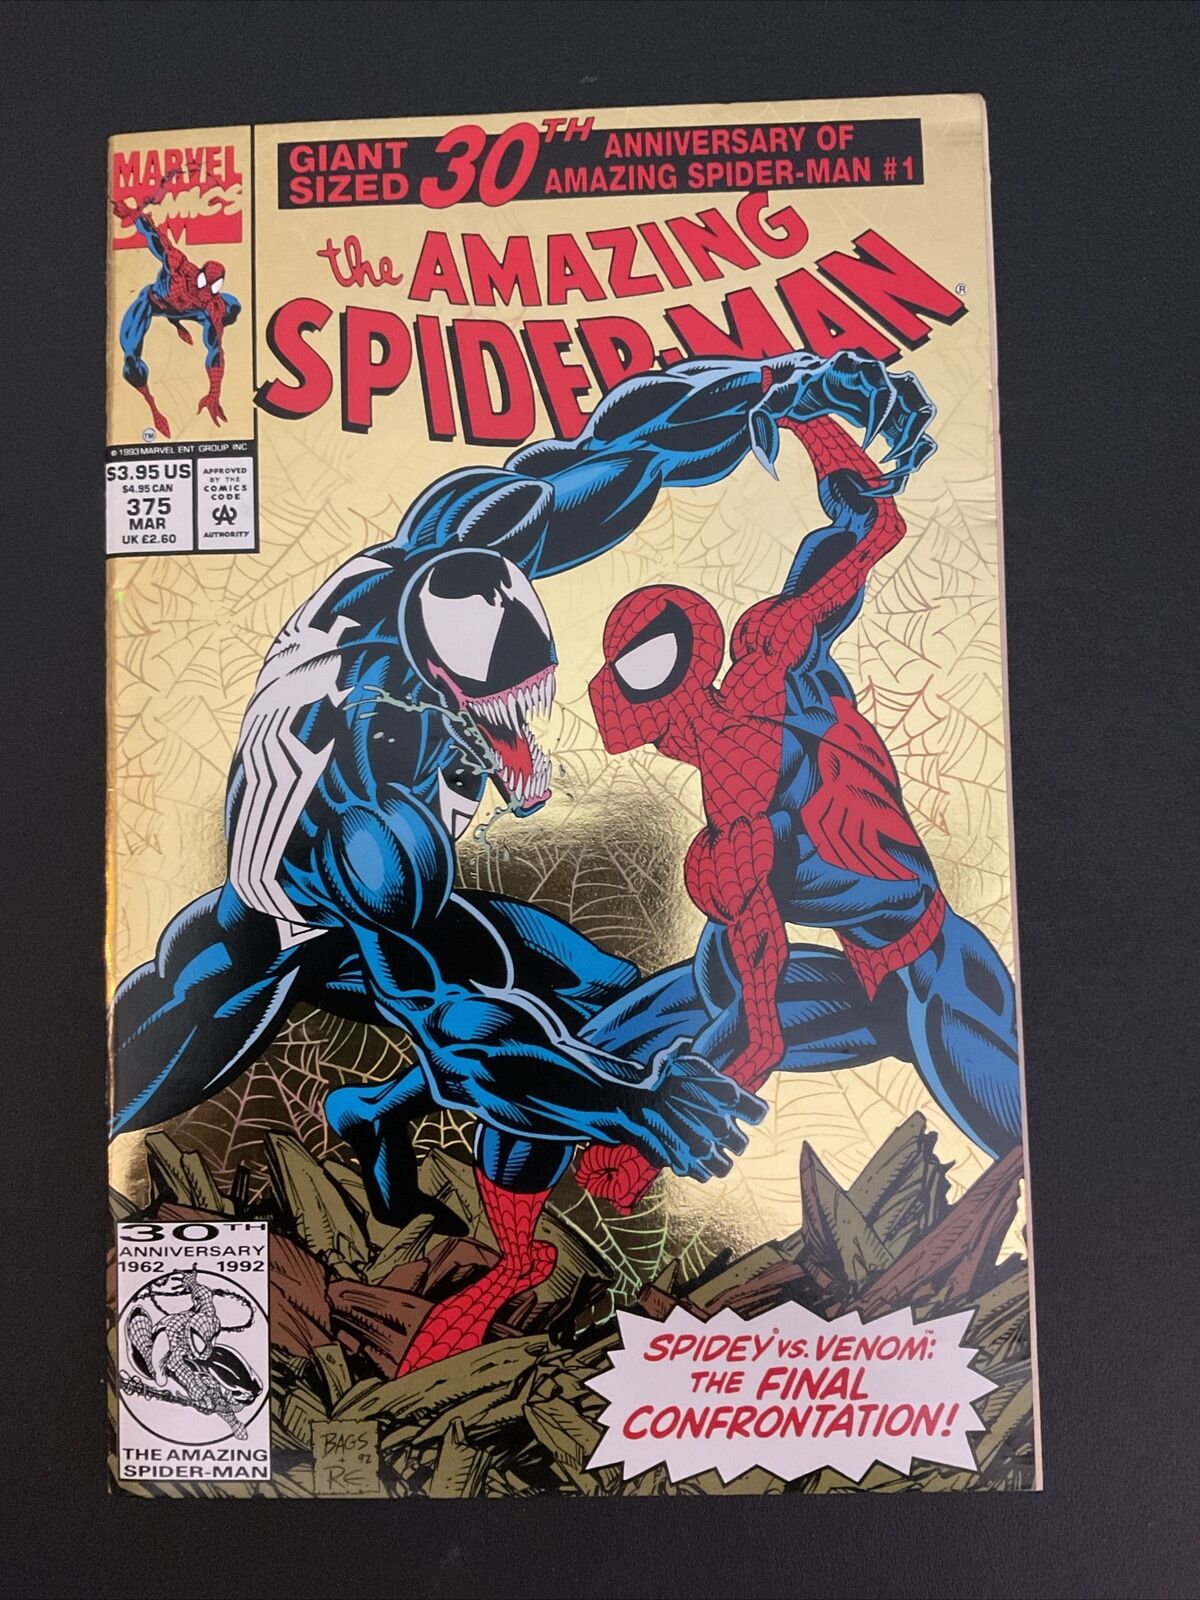 The AMAZING SPIDER-MAN #375 -NM/Mint - 9.8 - KEY ISSUE - 30TH ANNIVERSARY